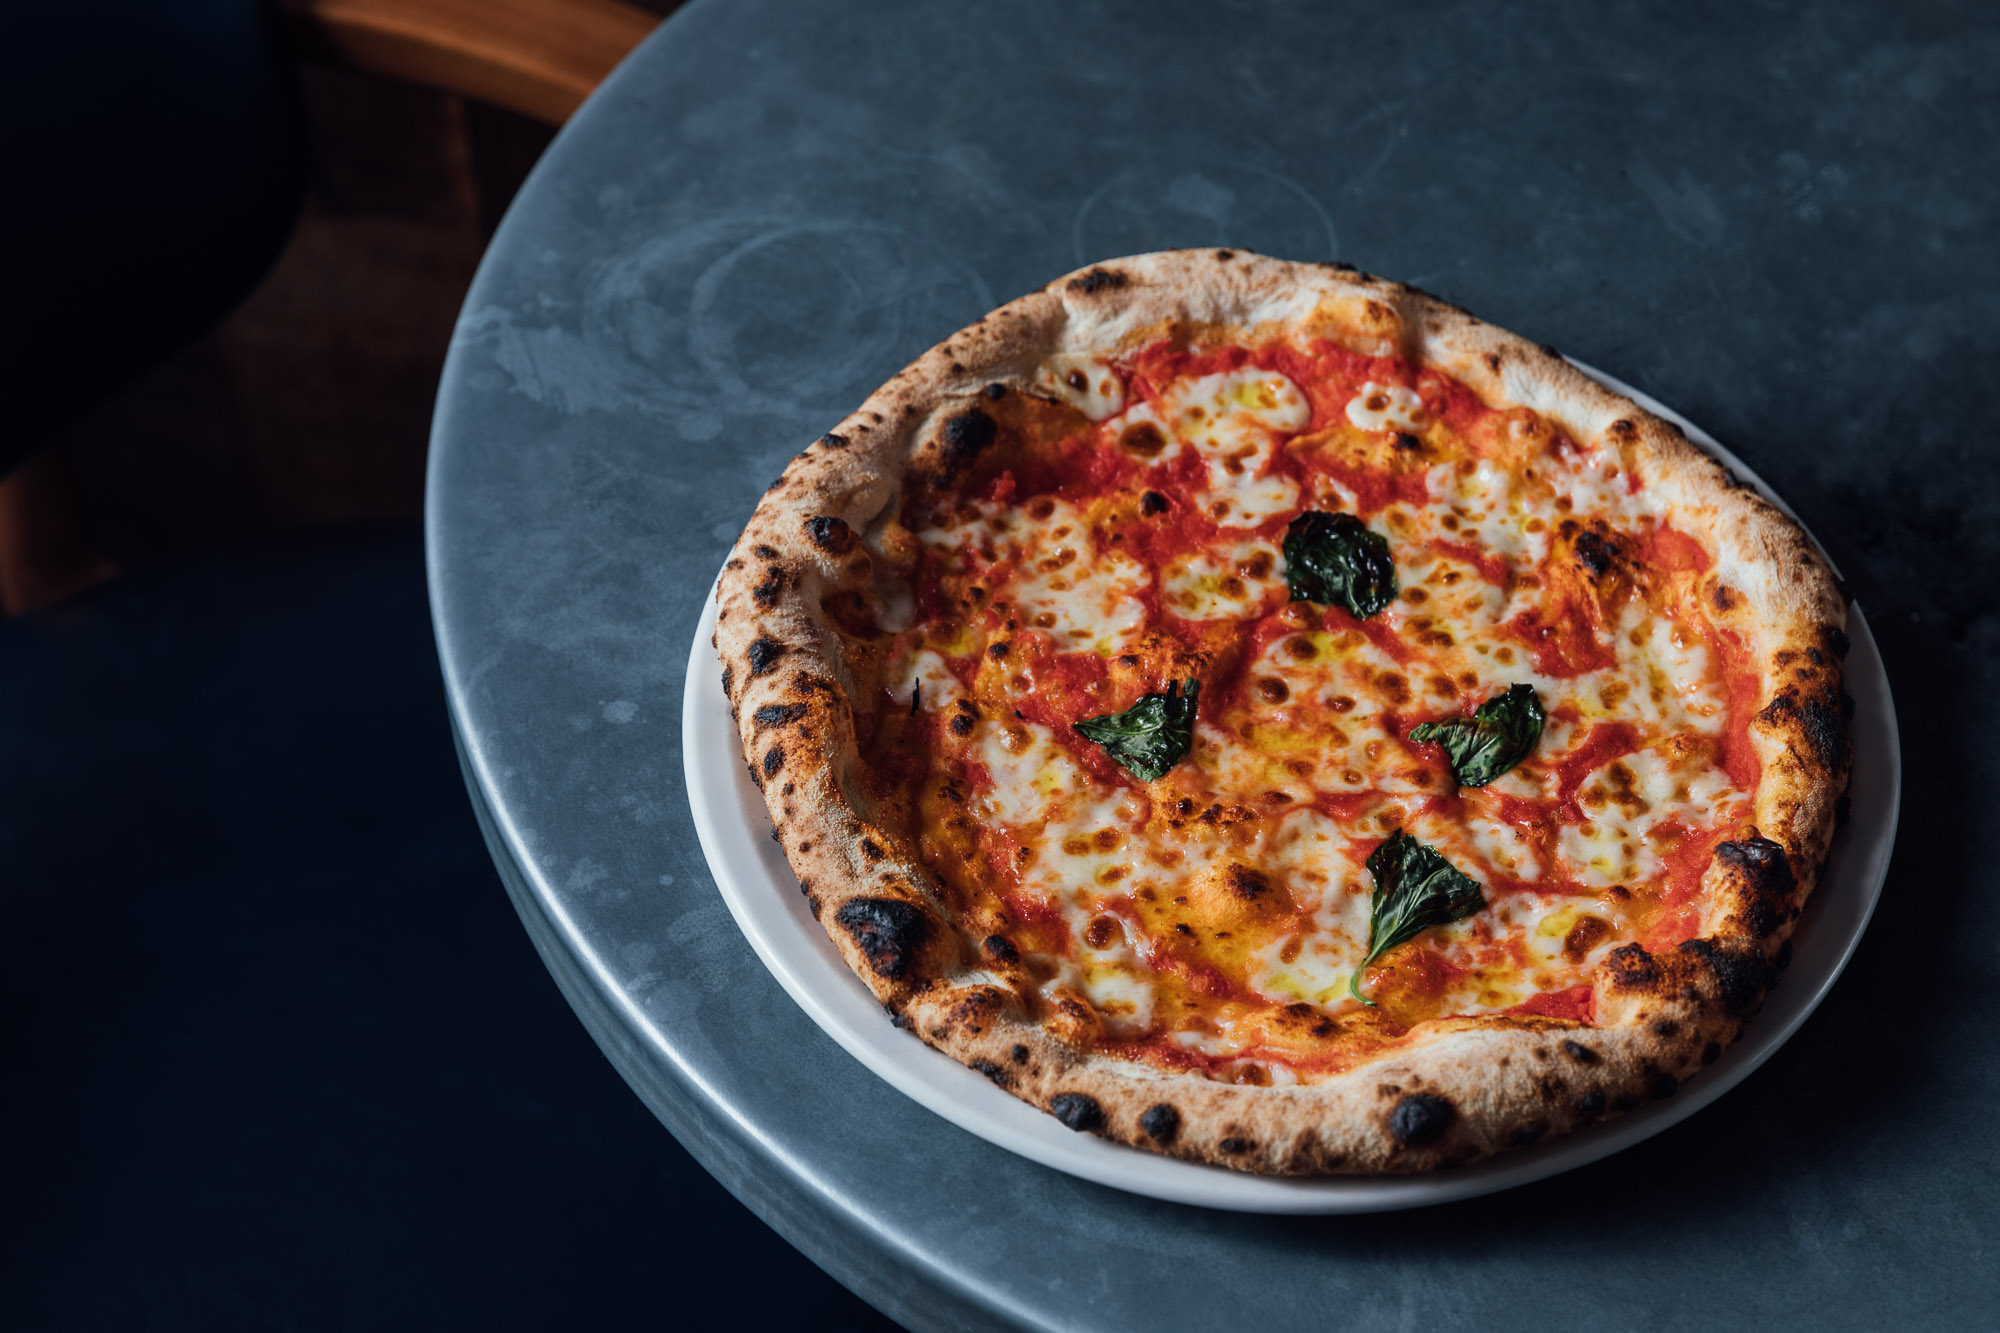 Wood Fired Margherita Pizza at The Beech House pub and restaurant in Amersham Buckinghamshire.jpg